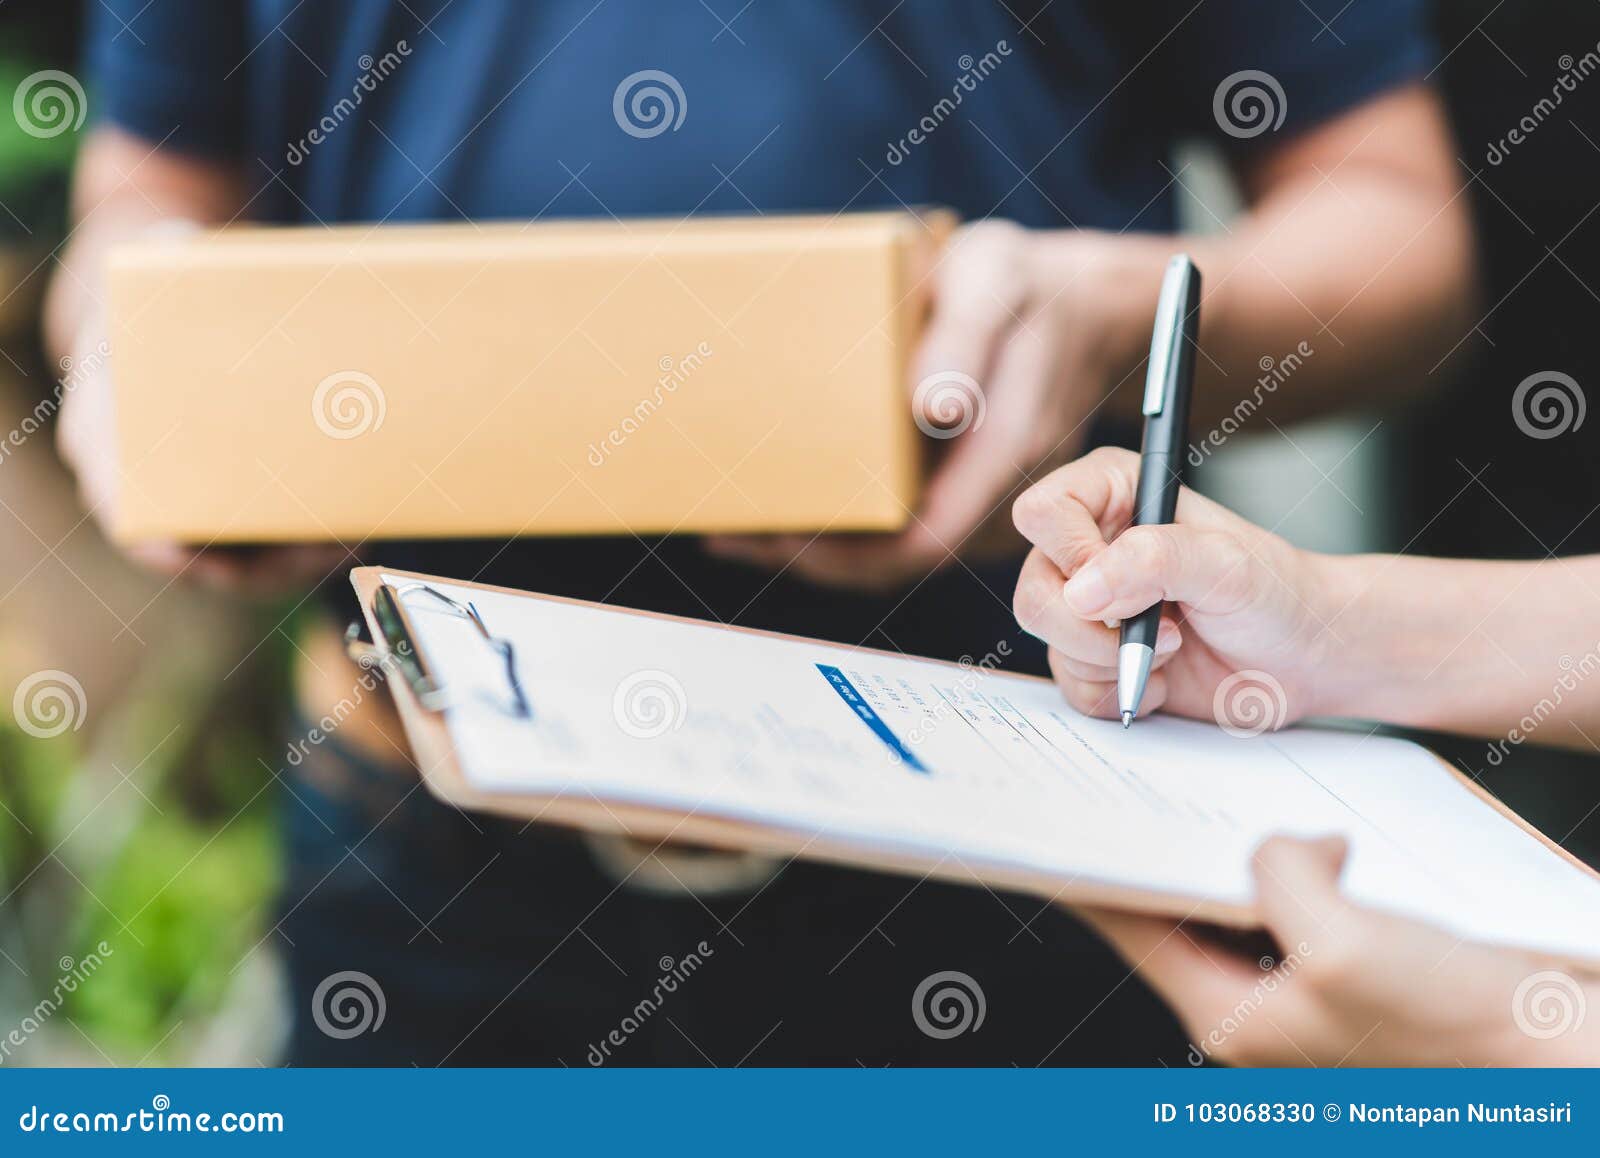 hand putting signature in clipboard to receive package from delivery man